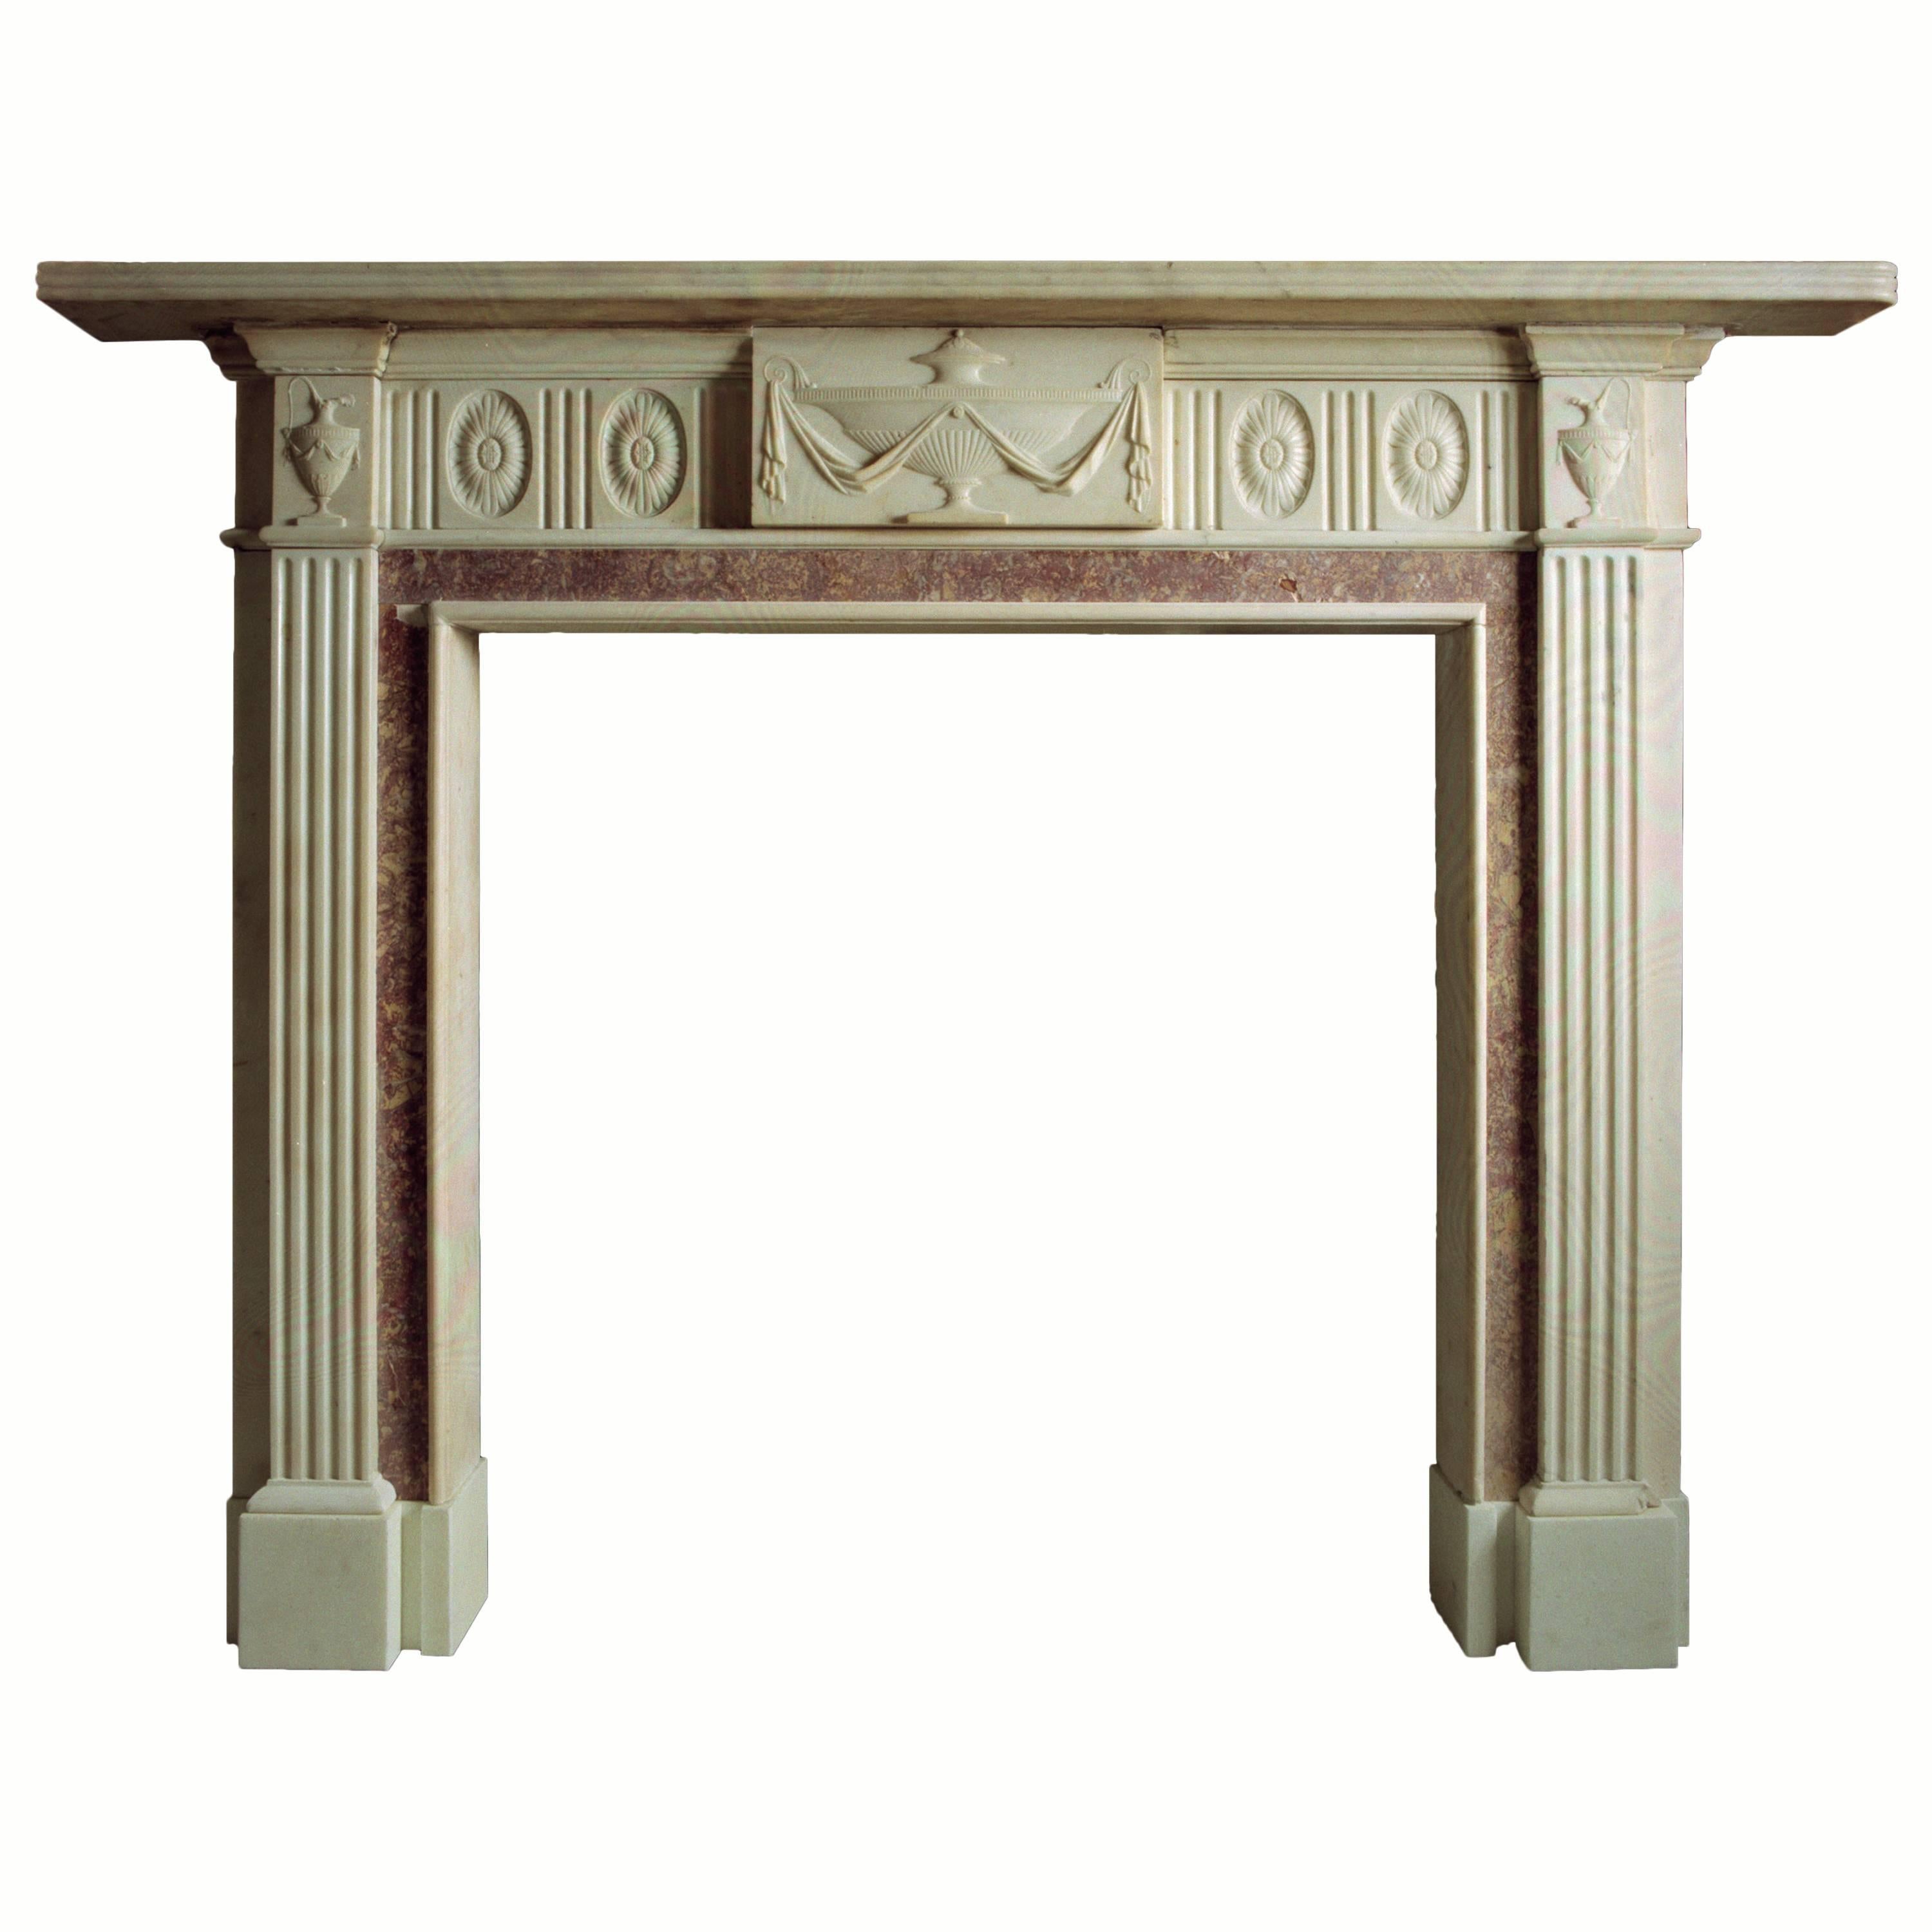 Georgian Reproduction Mantel in Statuary with Brocatella Inlay 'Pattern 4'